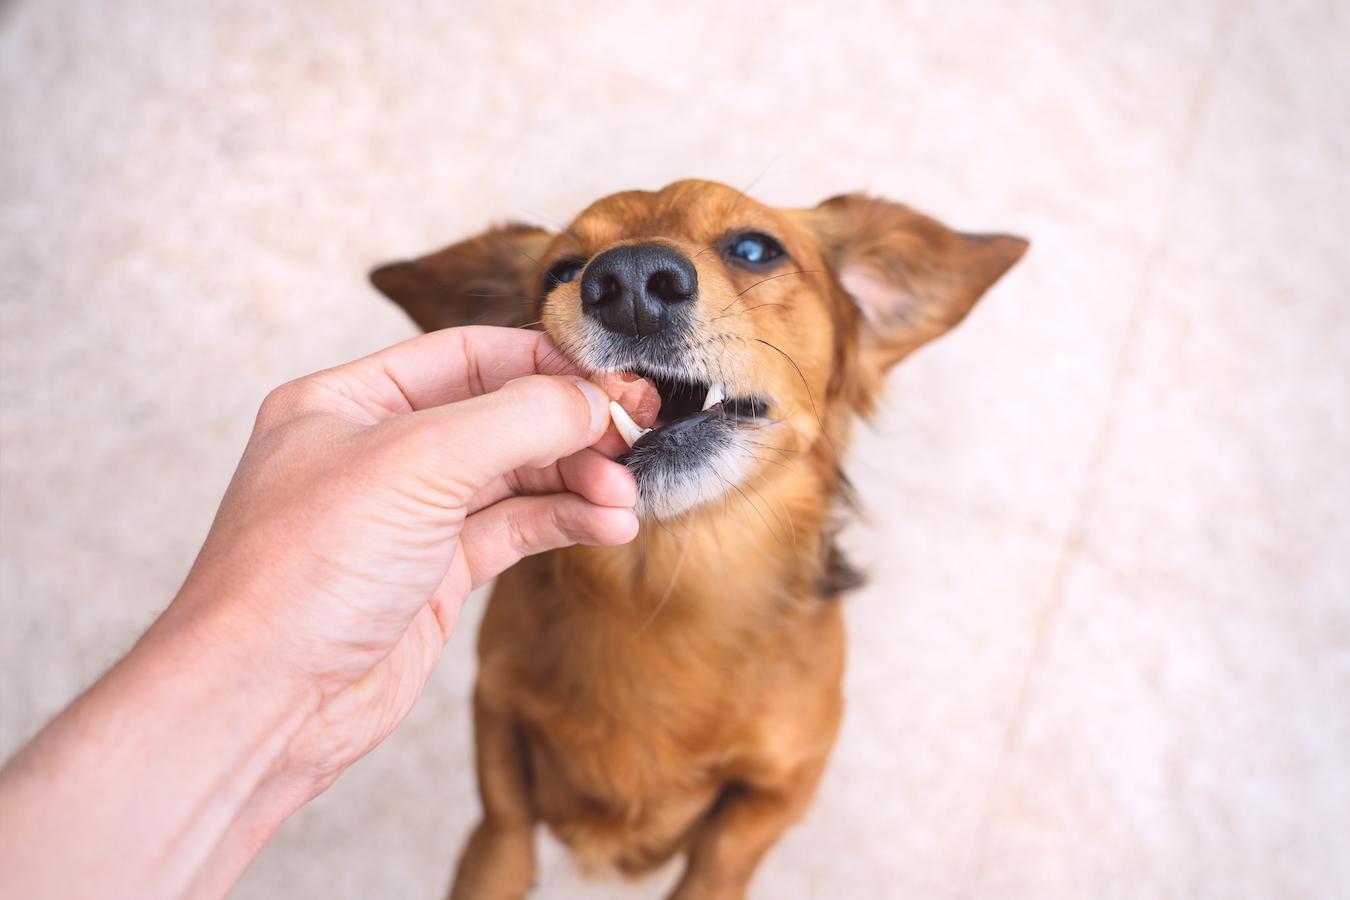 feeding a dog a treat dog's environment pet food new food same food dog's diet dog eat treats dental problems foreign body gastrointestinal tract poor appetite start eating blood diseases